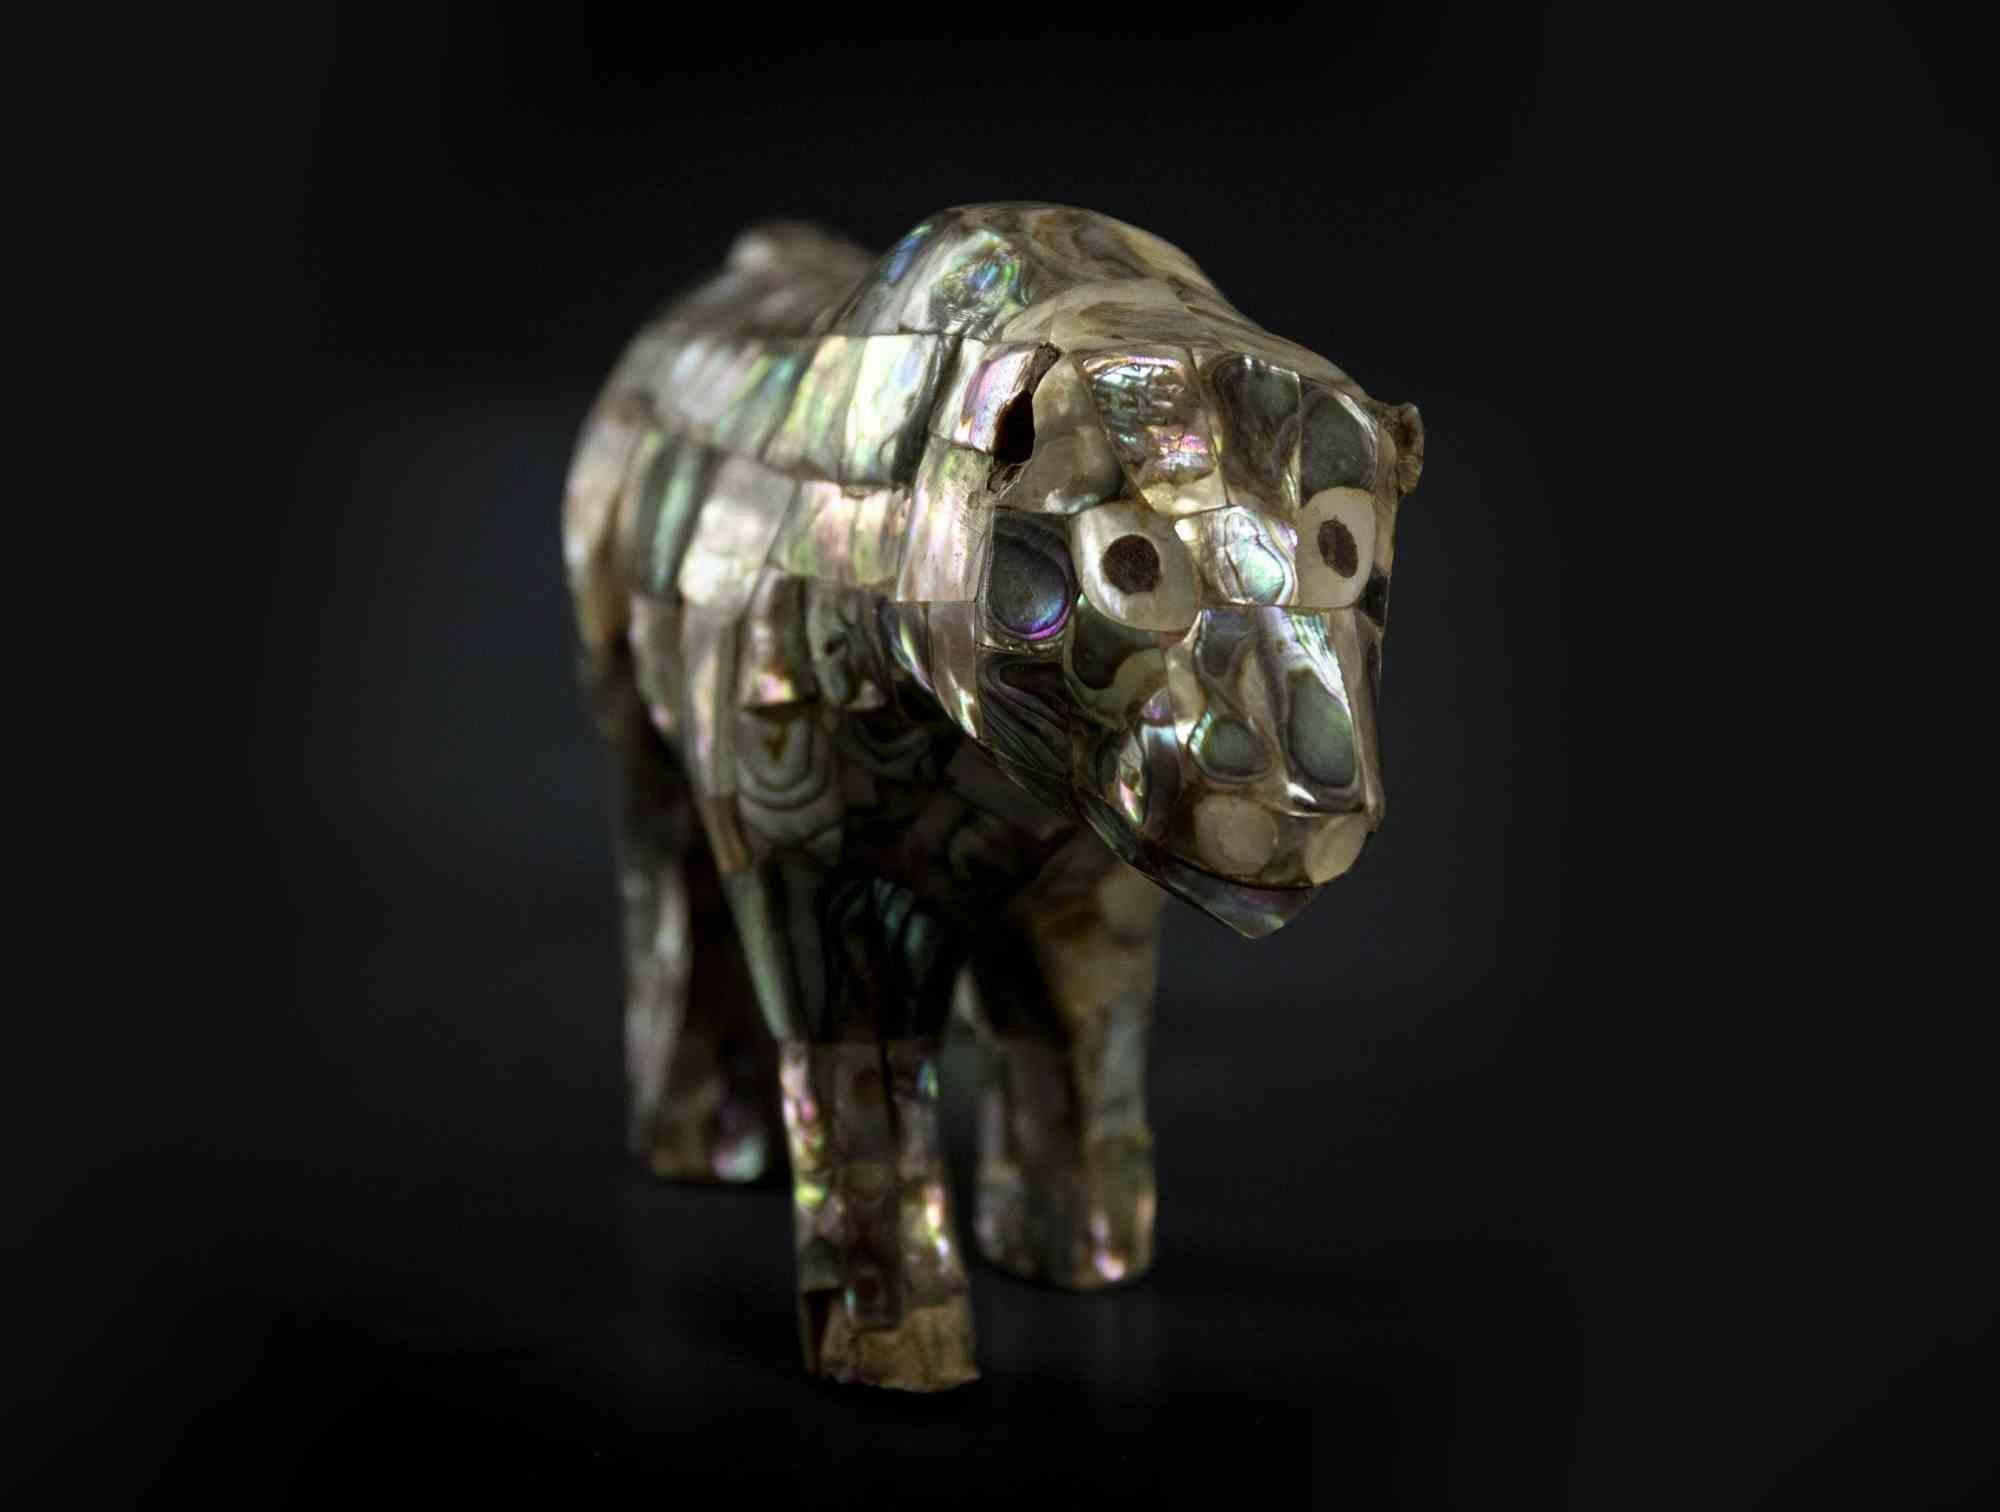 Vintage mother of pearl animal is an original decorative object realized by Anonymous Italian artist in 1970s.

Good conditions except for missing ears.